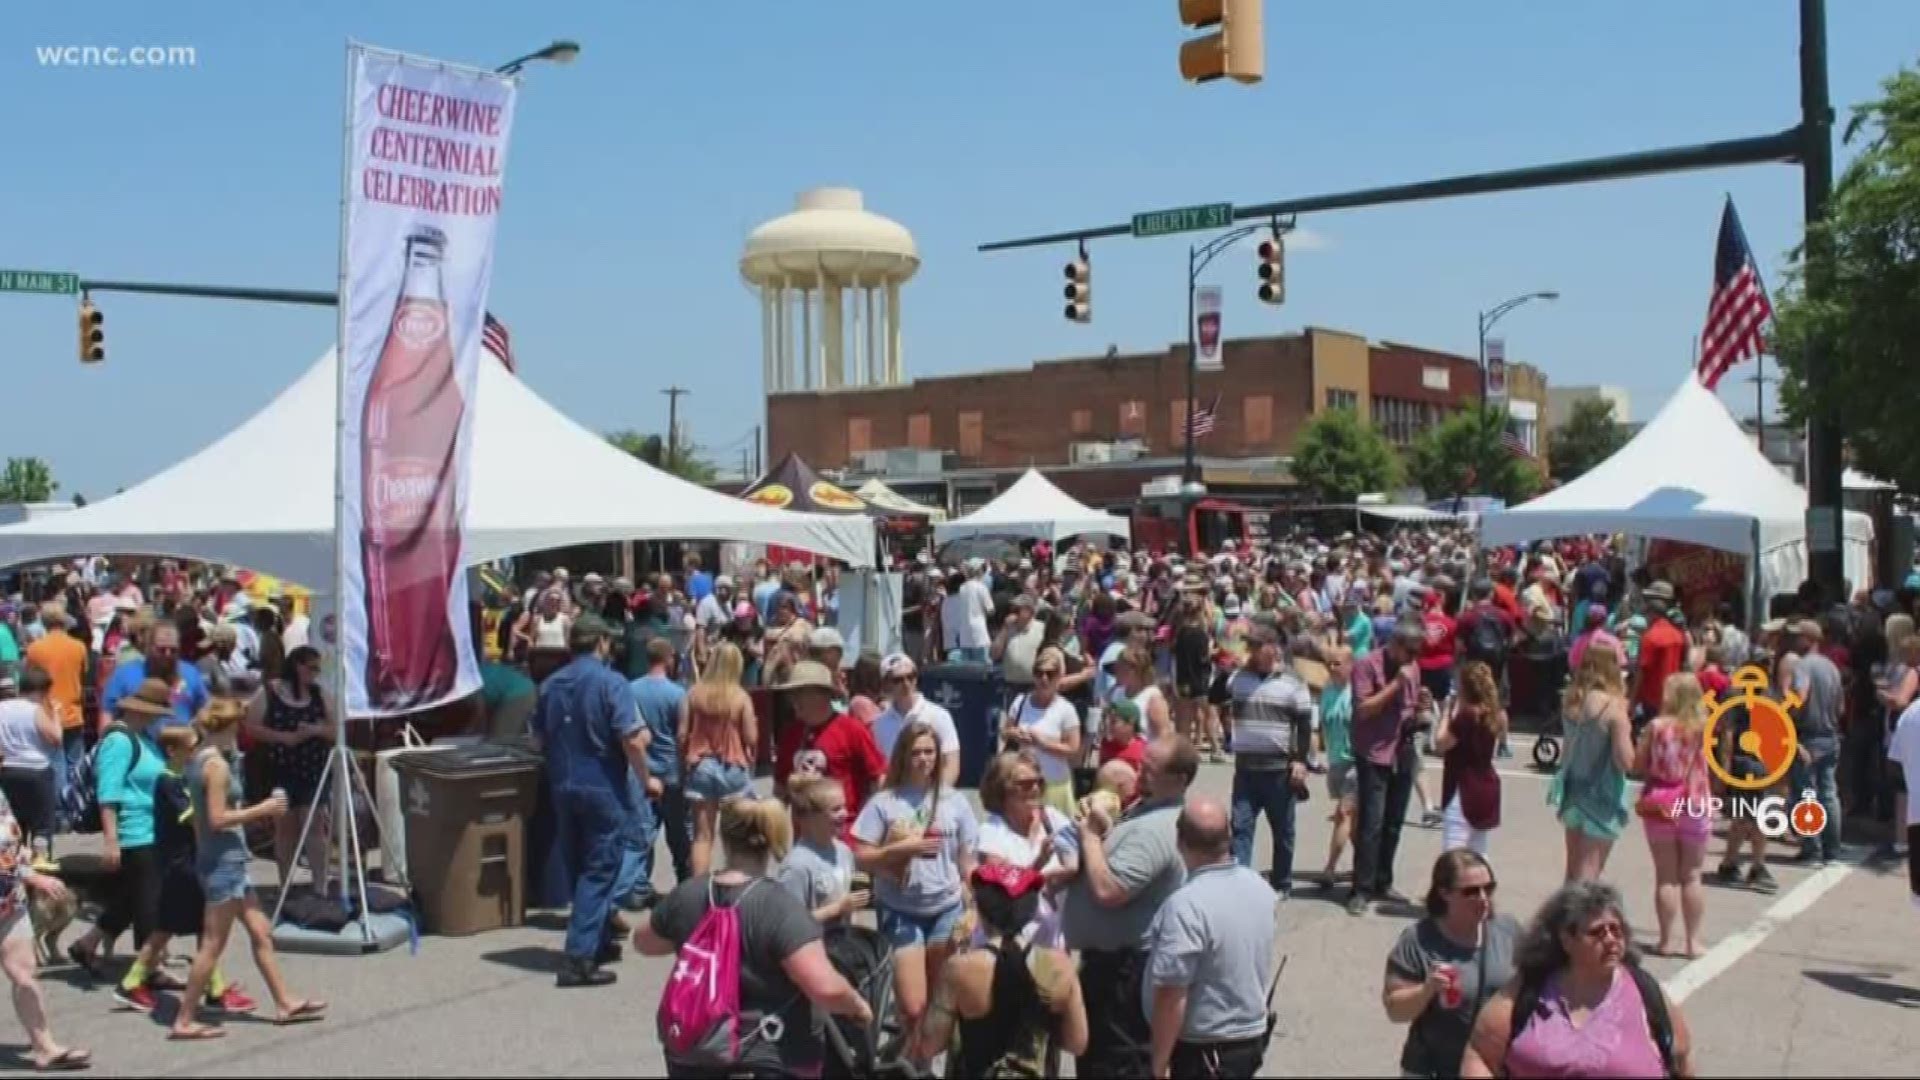 This weekend you can enjoy the sweet side of summer with a Carolina classic at the annual Cheerwine Festival in downtown Salisbury.